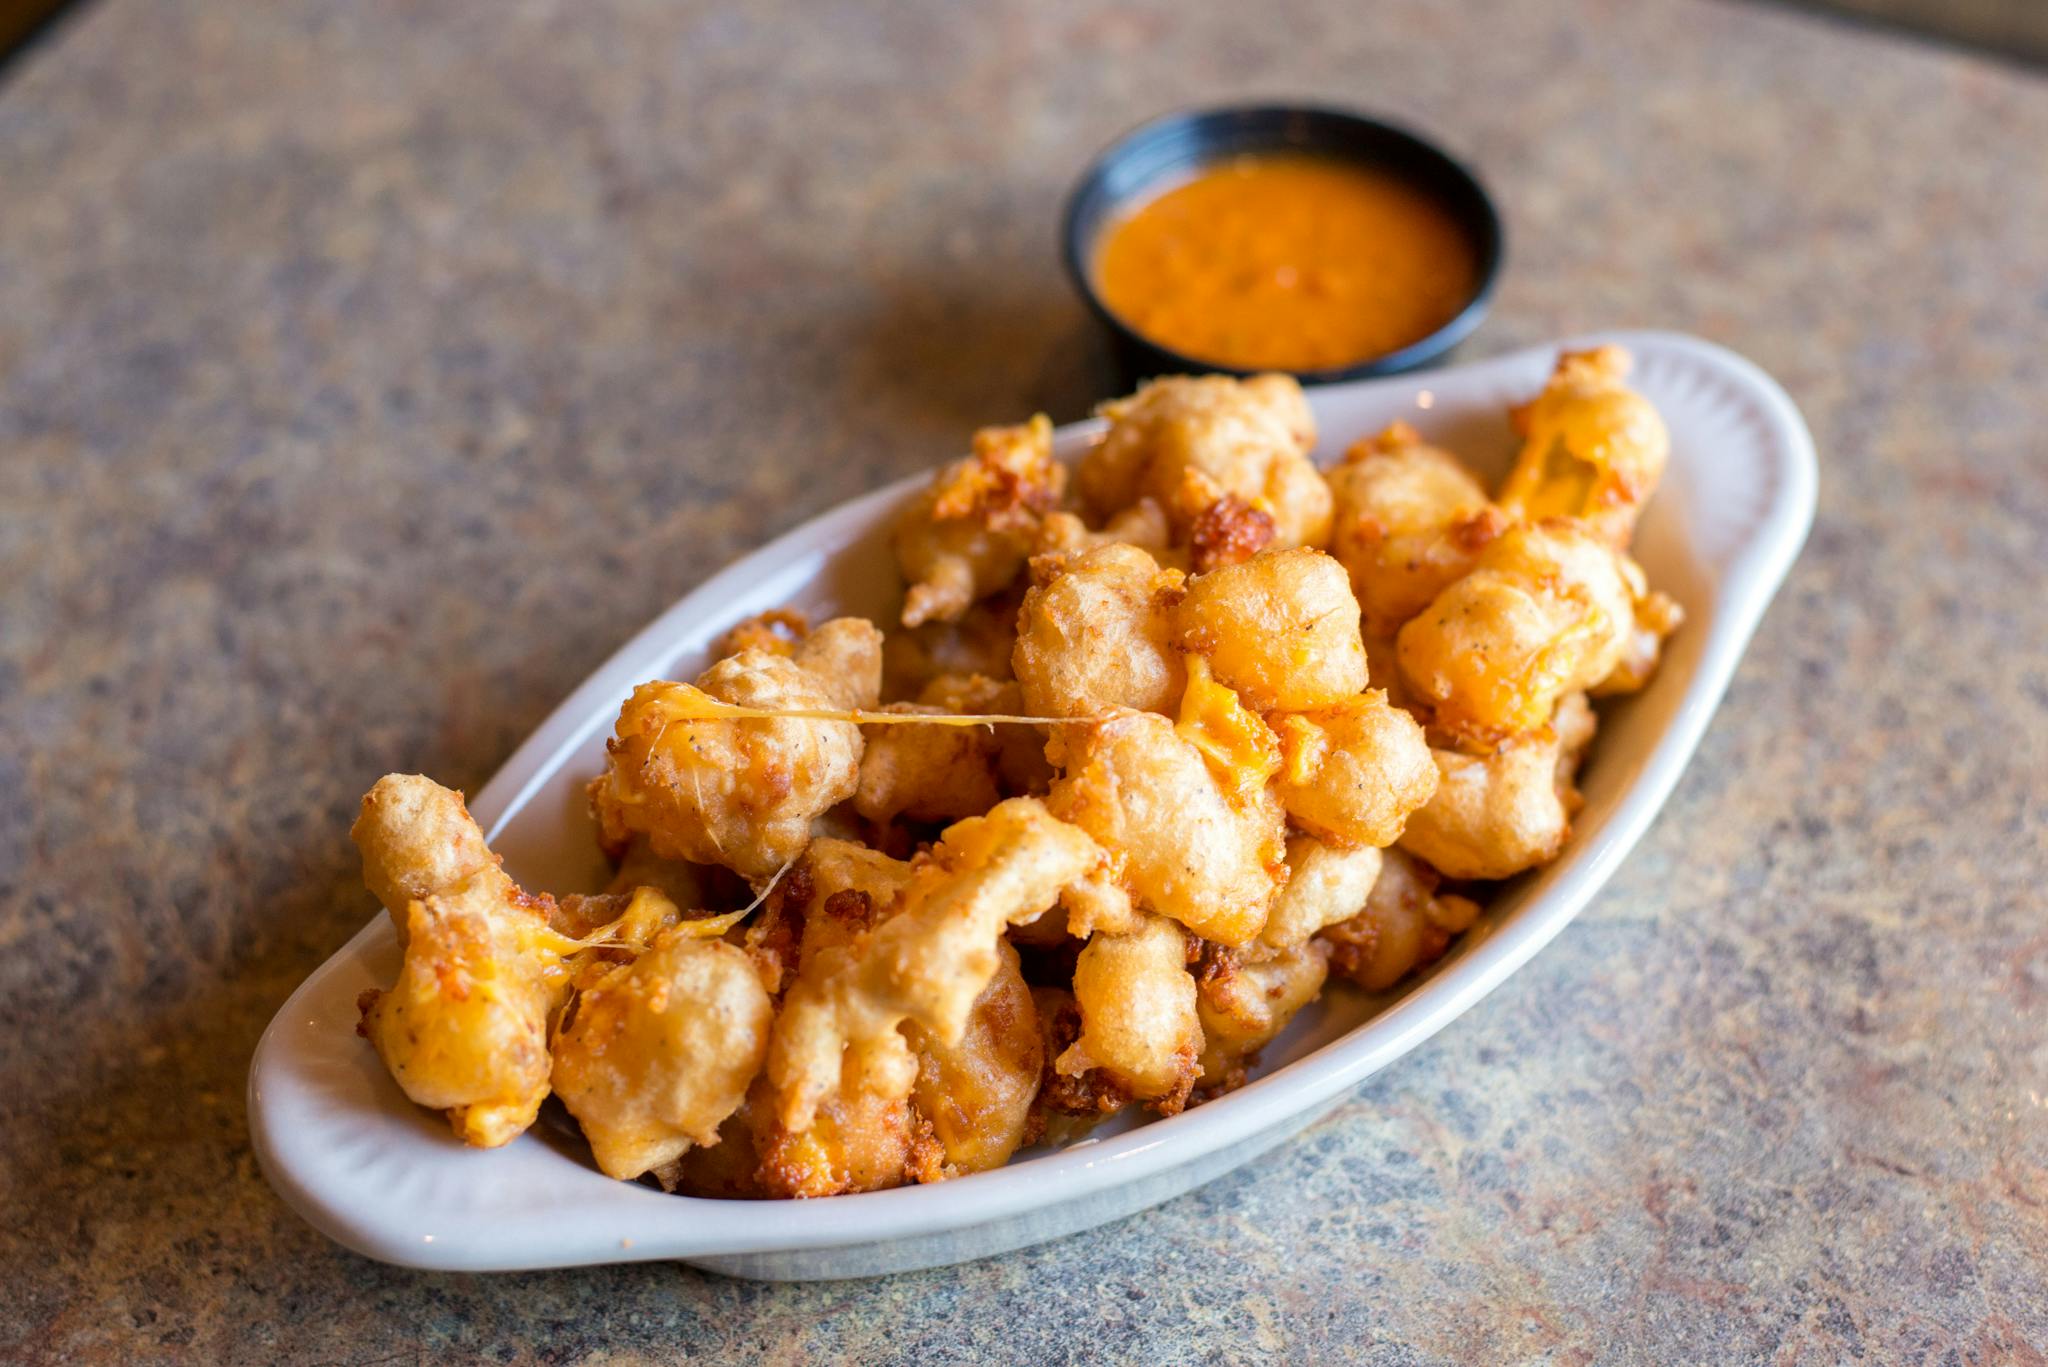 Beer Battered Cheese Curds from Brickhouse Craft Burgers & Brews in De Pere, WI